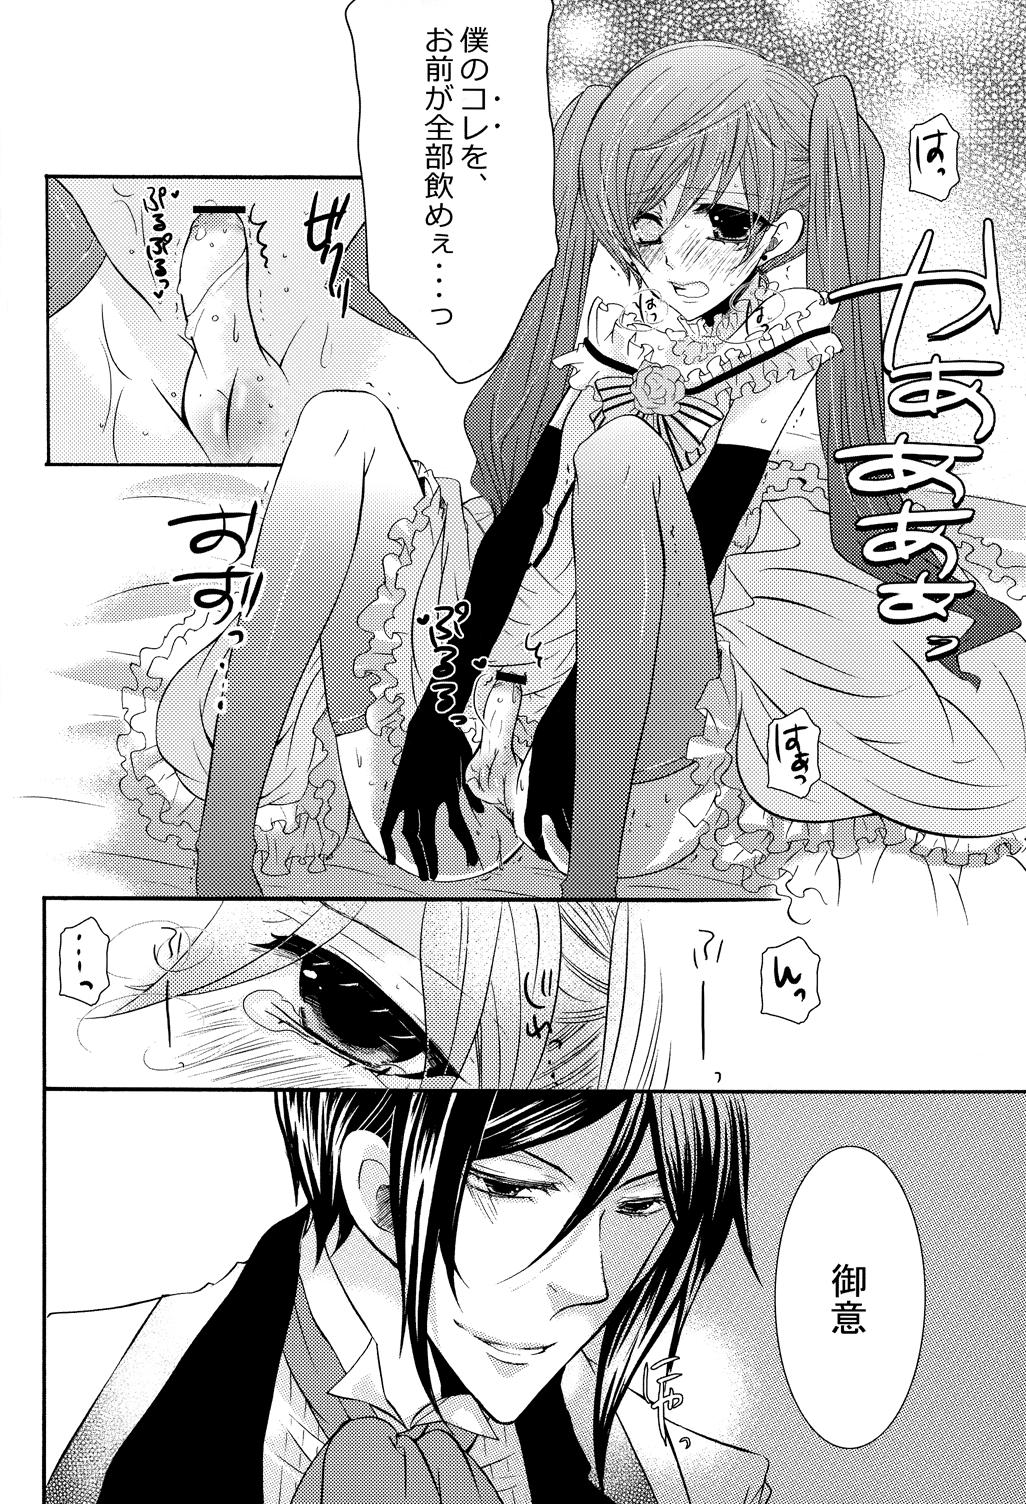 Blowing Charles - Black butler Stepfamily - Page 12